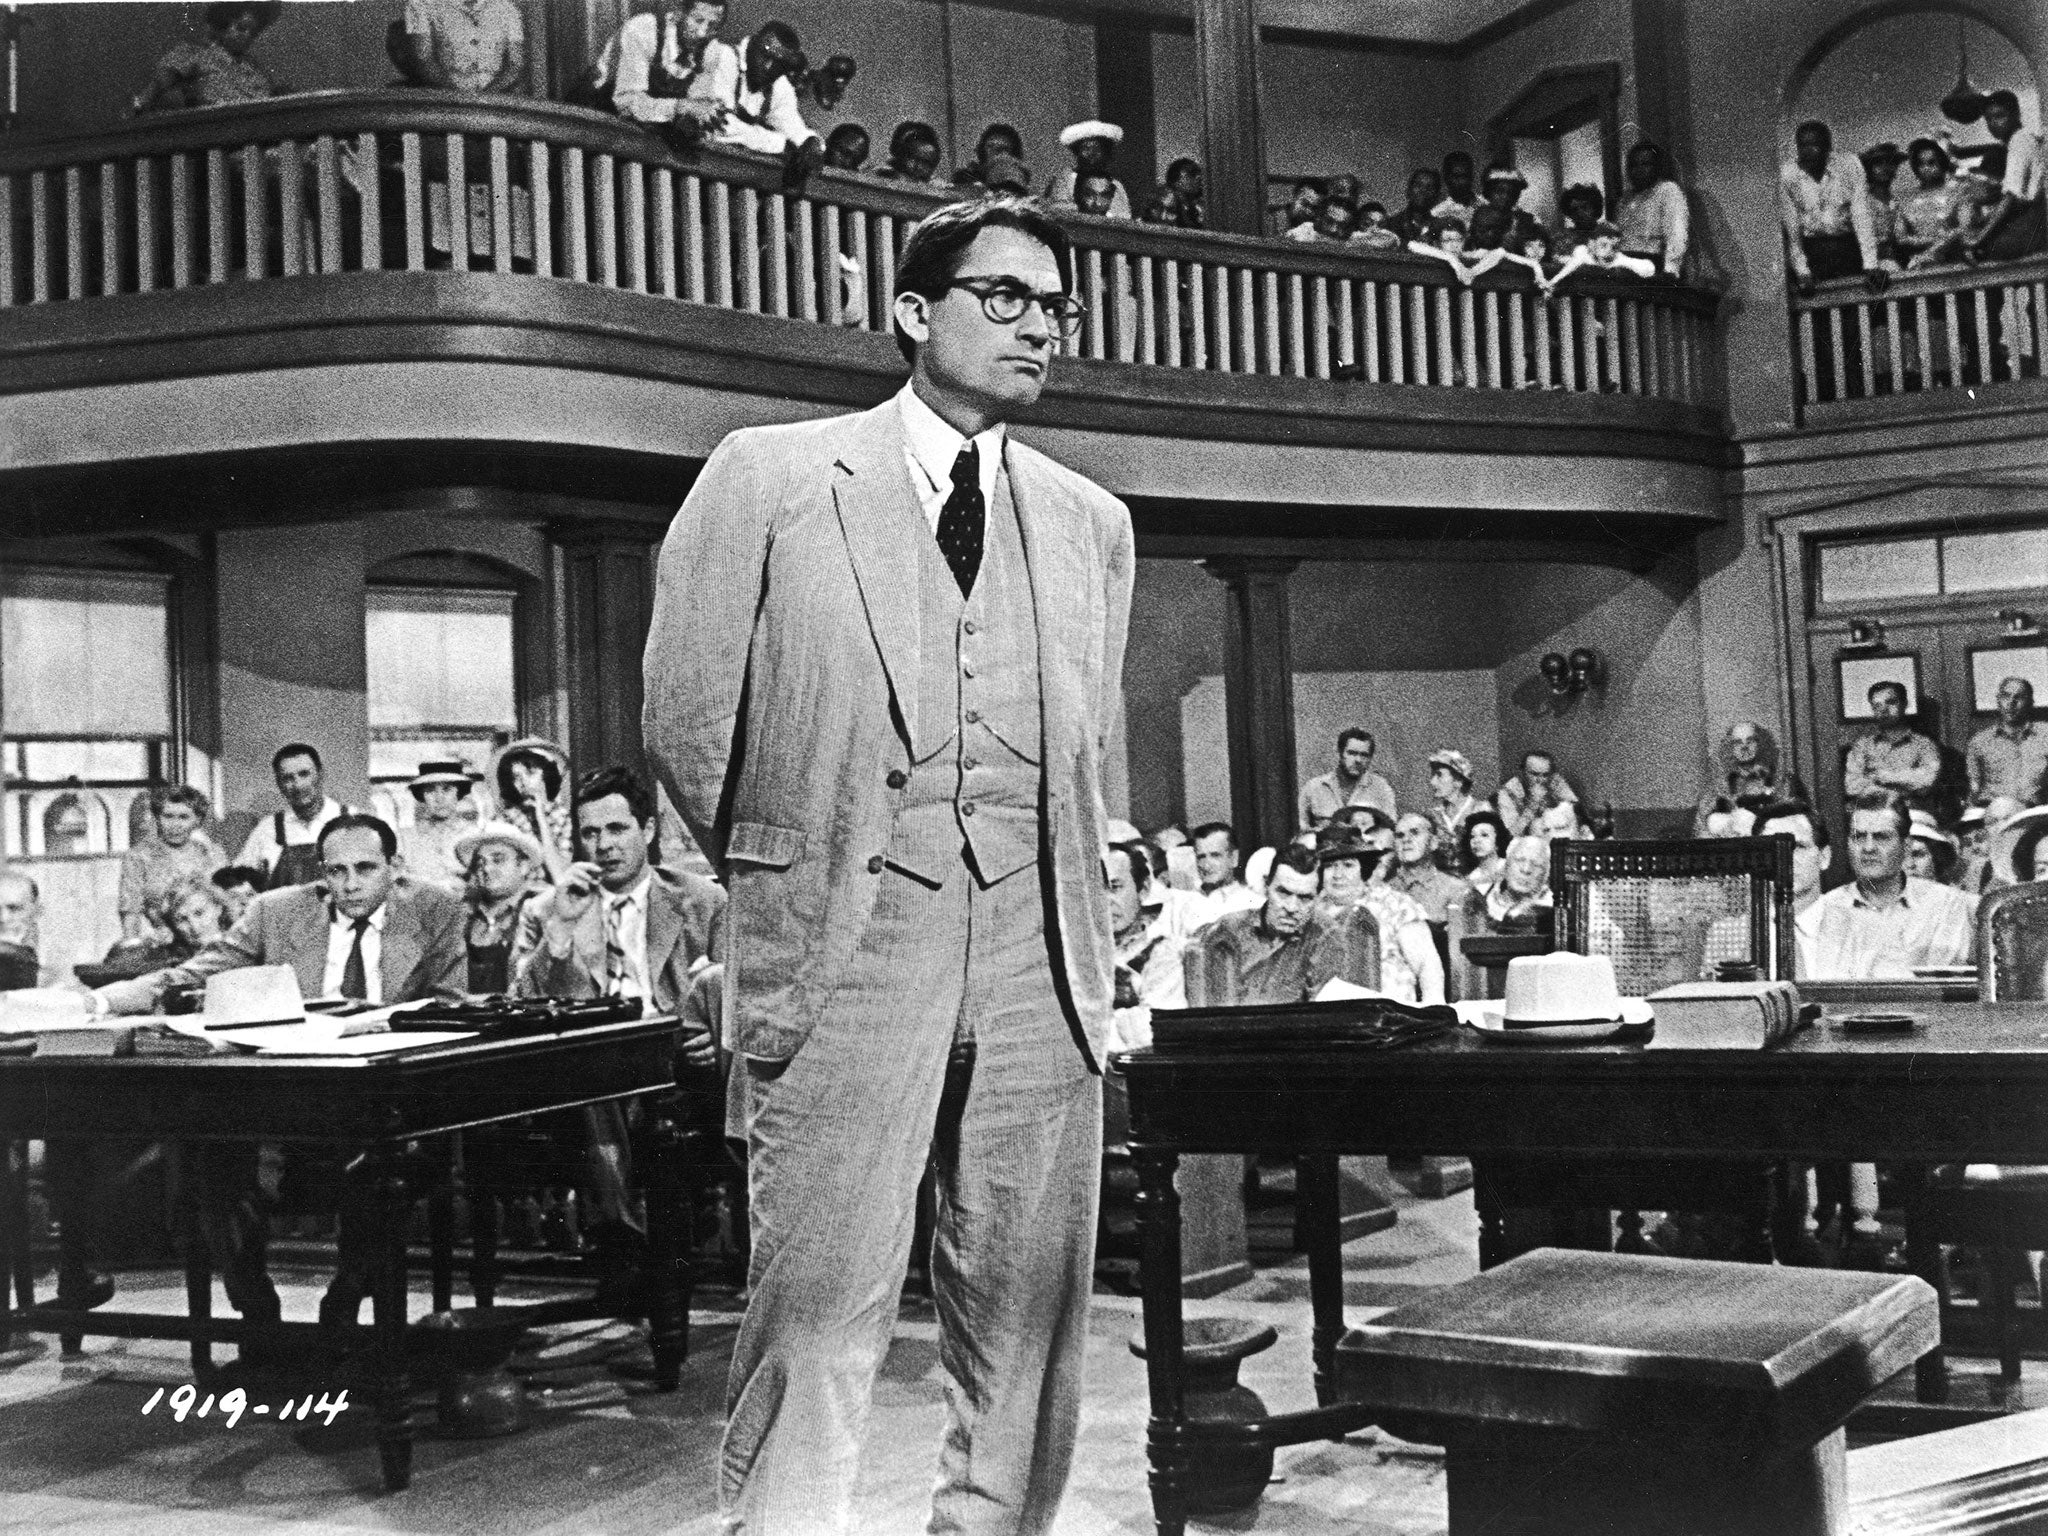 The 1962 film adaptation of To Kill a Mockingbird, earned Gregory Peck an Oscar for his portrayal of Atticus Finch